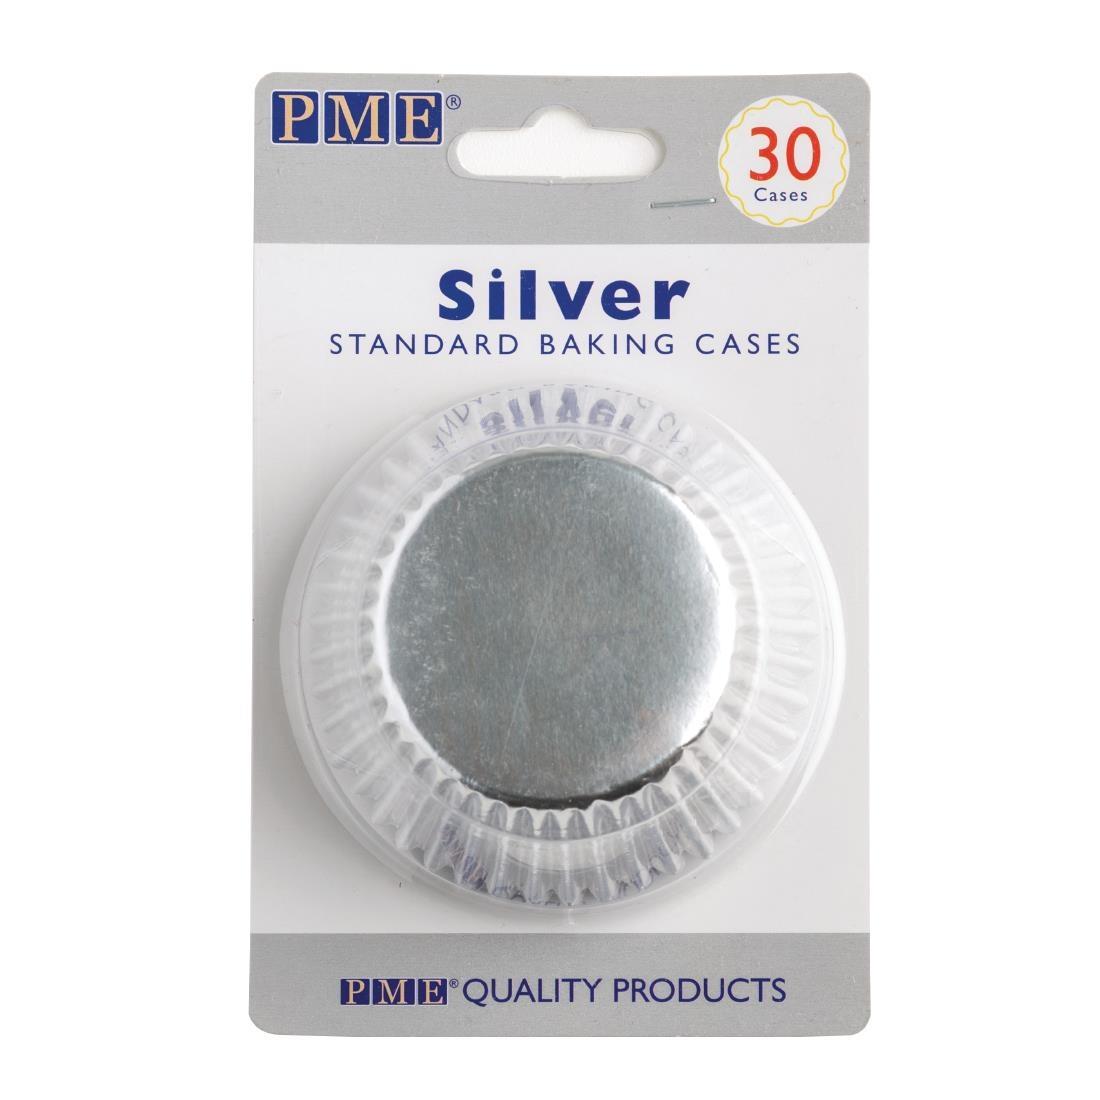 PME Cupcake Baking Cases Silver (Pack of 30) - GE846  - 1